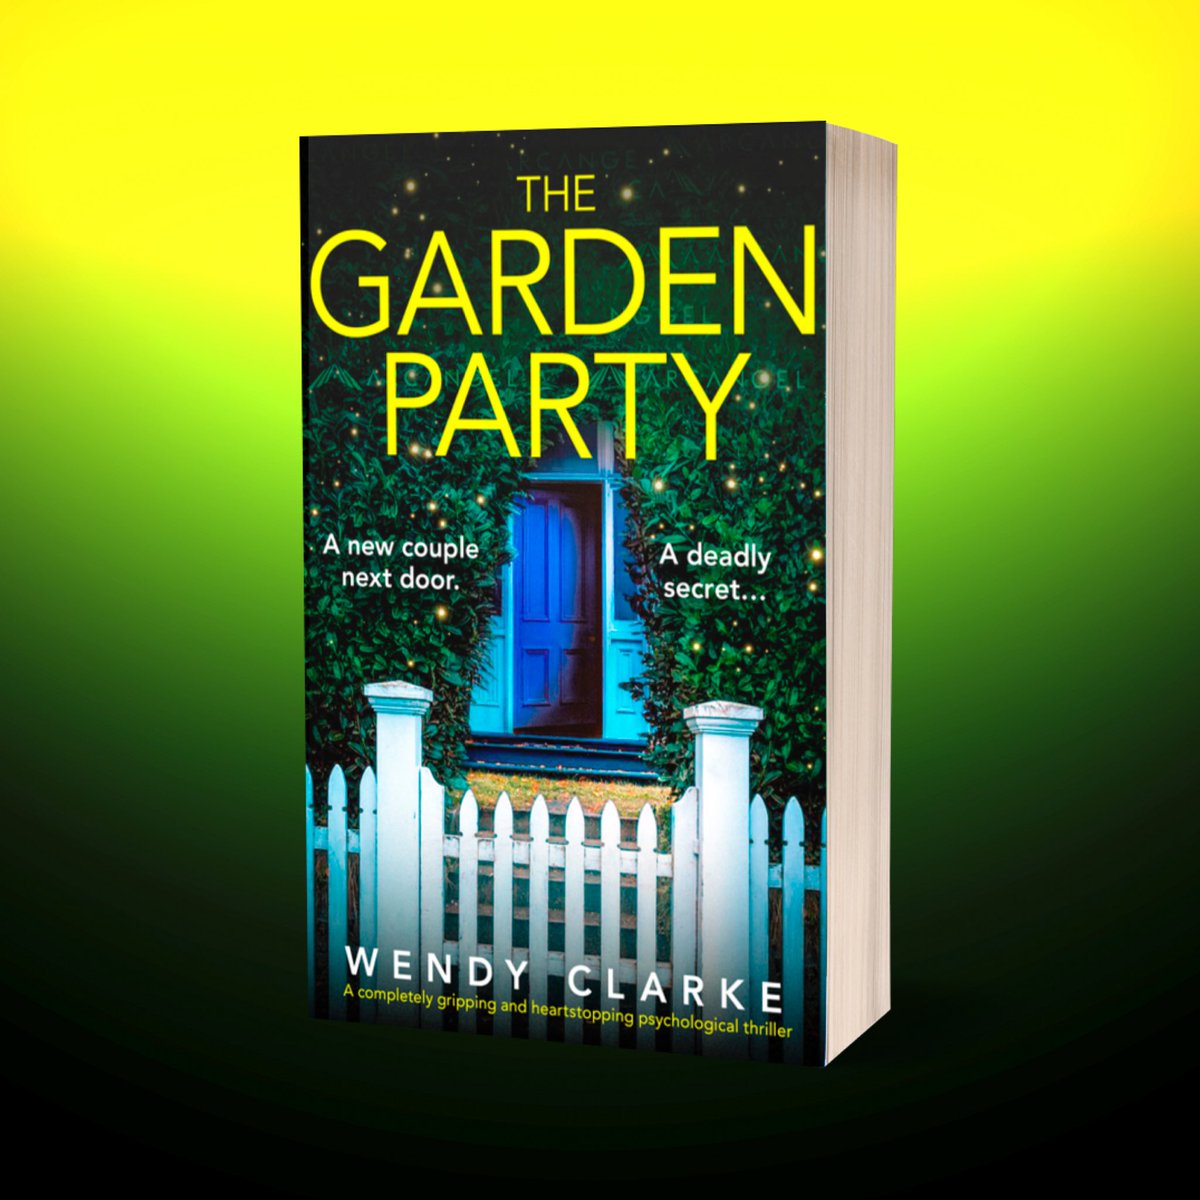 Exciting news! My latest psychological thriller #TheGardenParty made the No.1 spot in new releases in its genre. ⭐️⭐️⭐️⭐️⭐️ ‘An addictive Twisty read’ 📚 geni.us/B0CRB58NRBauth… @bookouture #readerscommunity